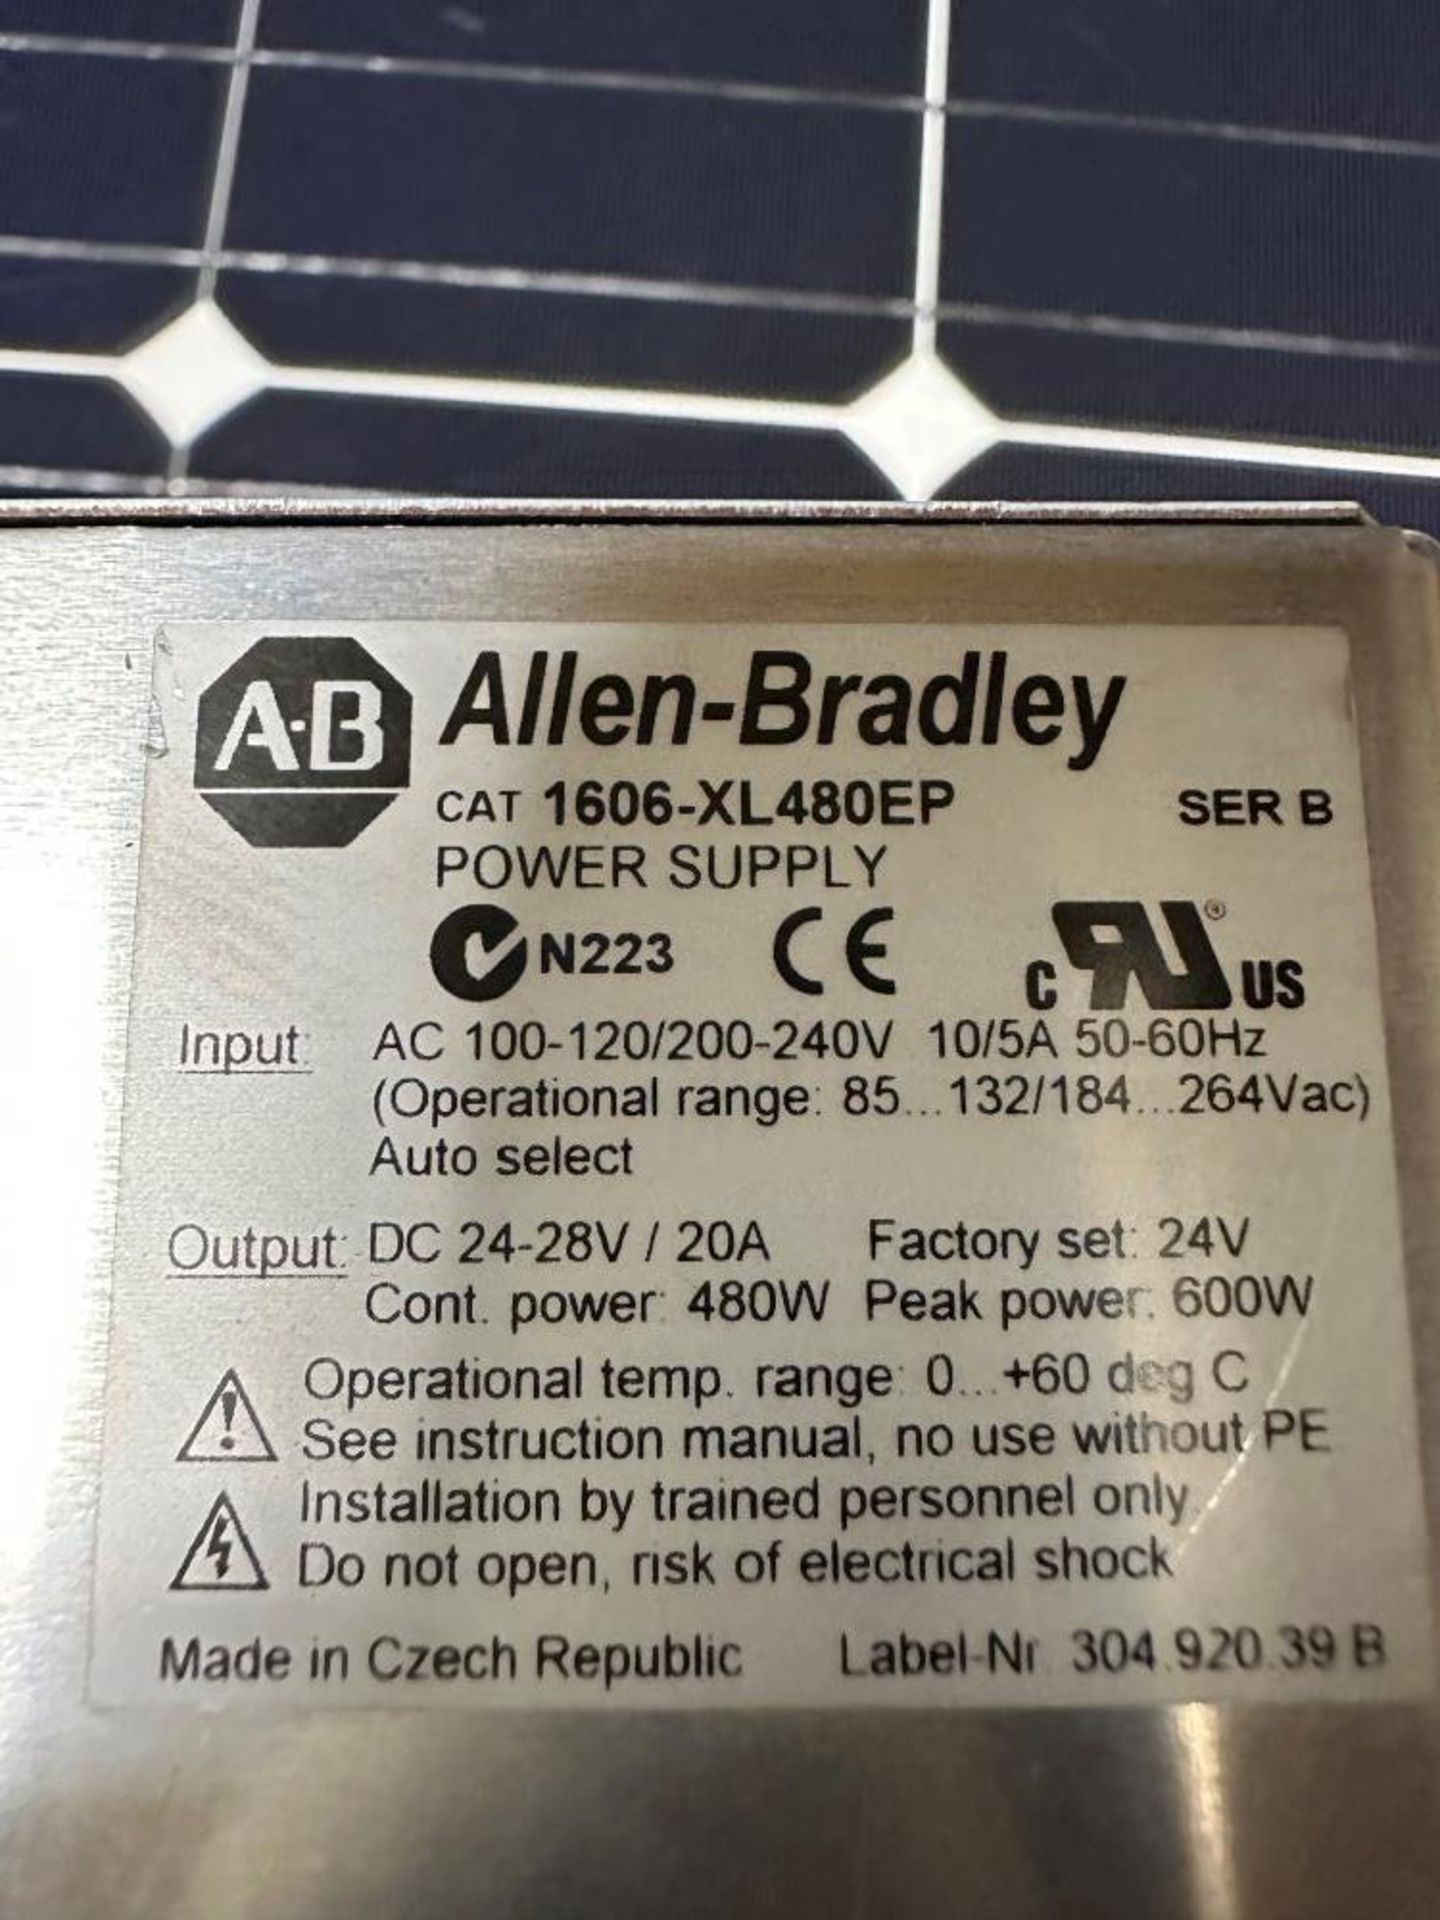 LOT OF 2 ALLEN BRADLEY 1606-XL480EP DIN RAIL MOUNTED POWER SUPPLIES - Image 3 of 3